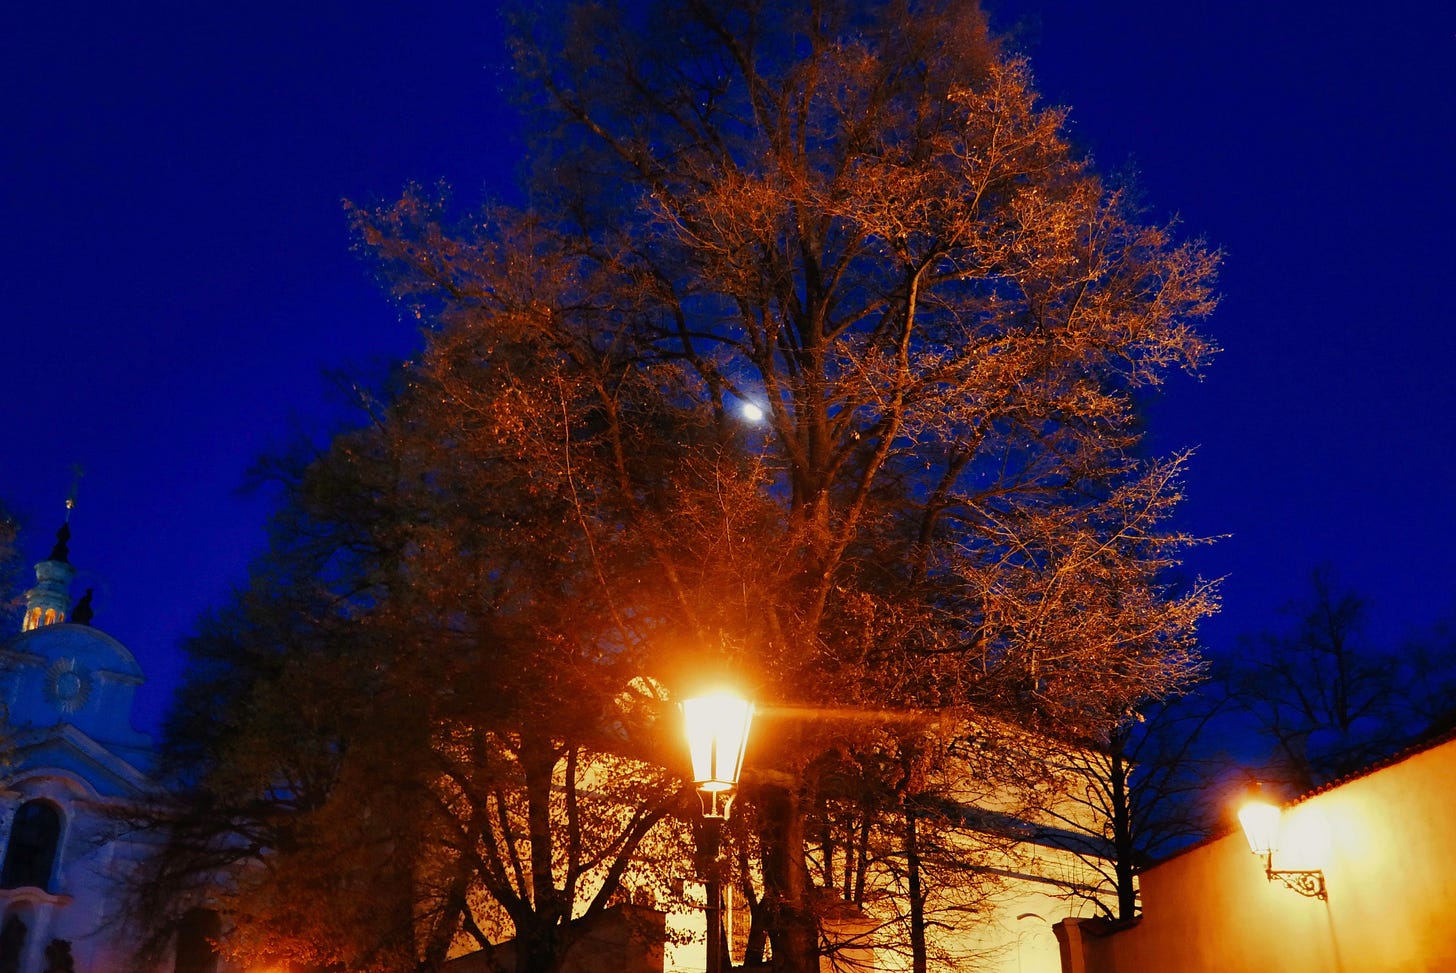 Street lights, lights in a steeple, and the full moon peeking through the trees light up the dark blue night sky